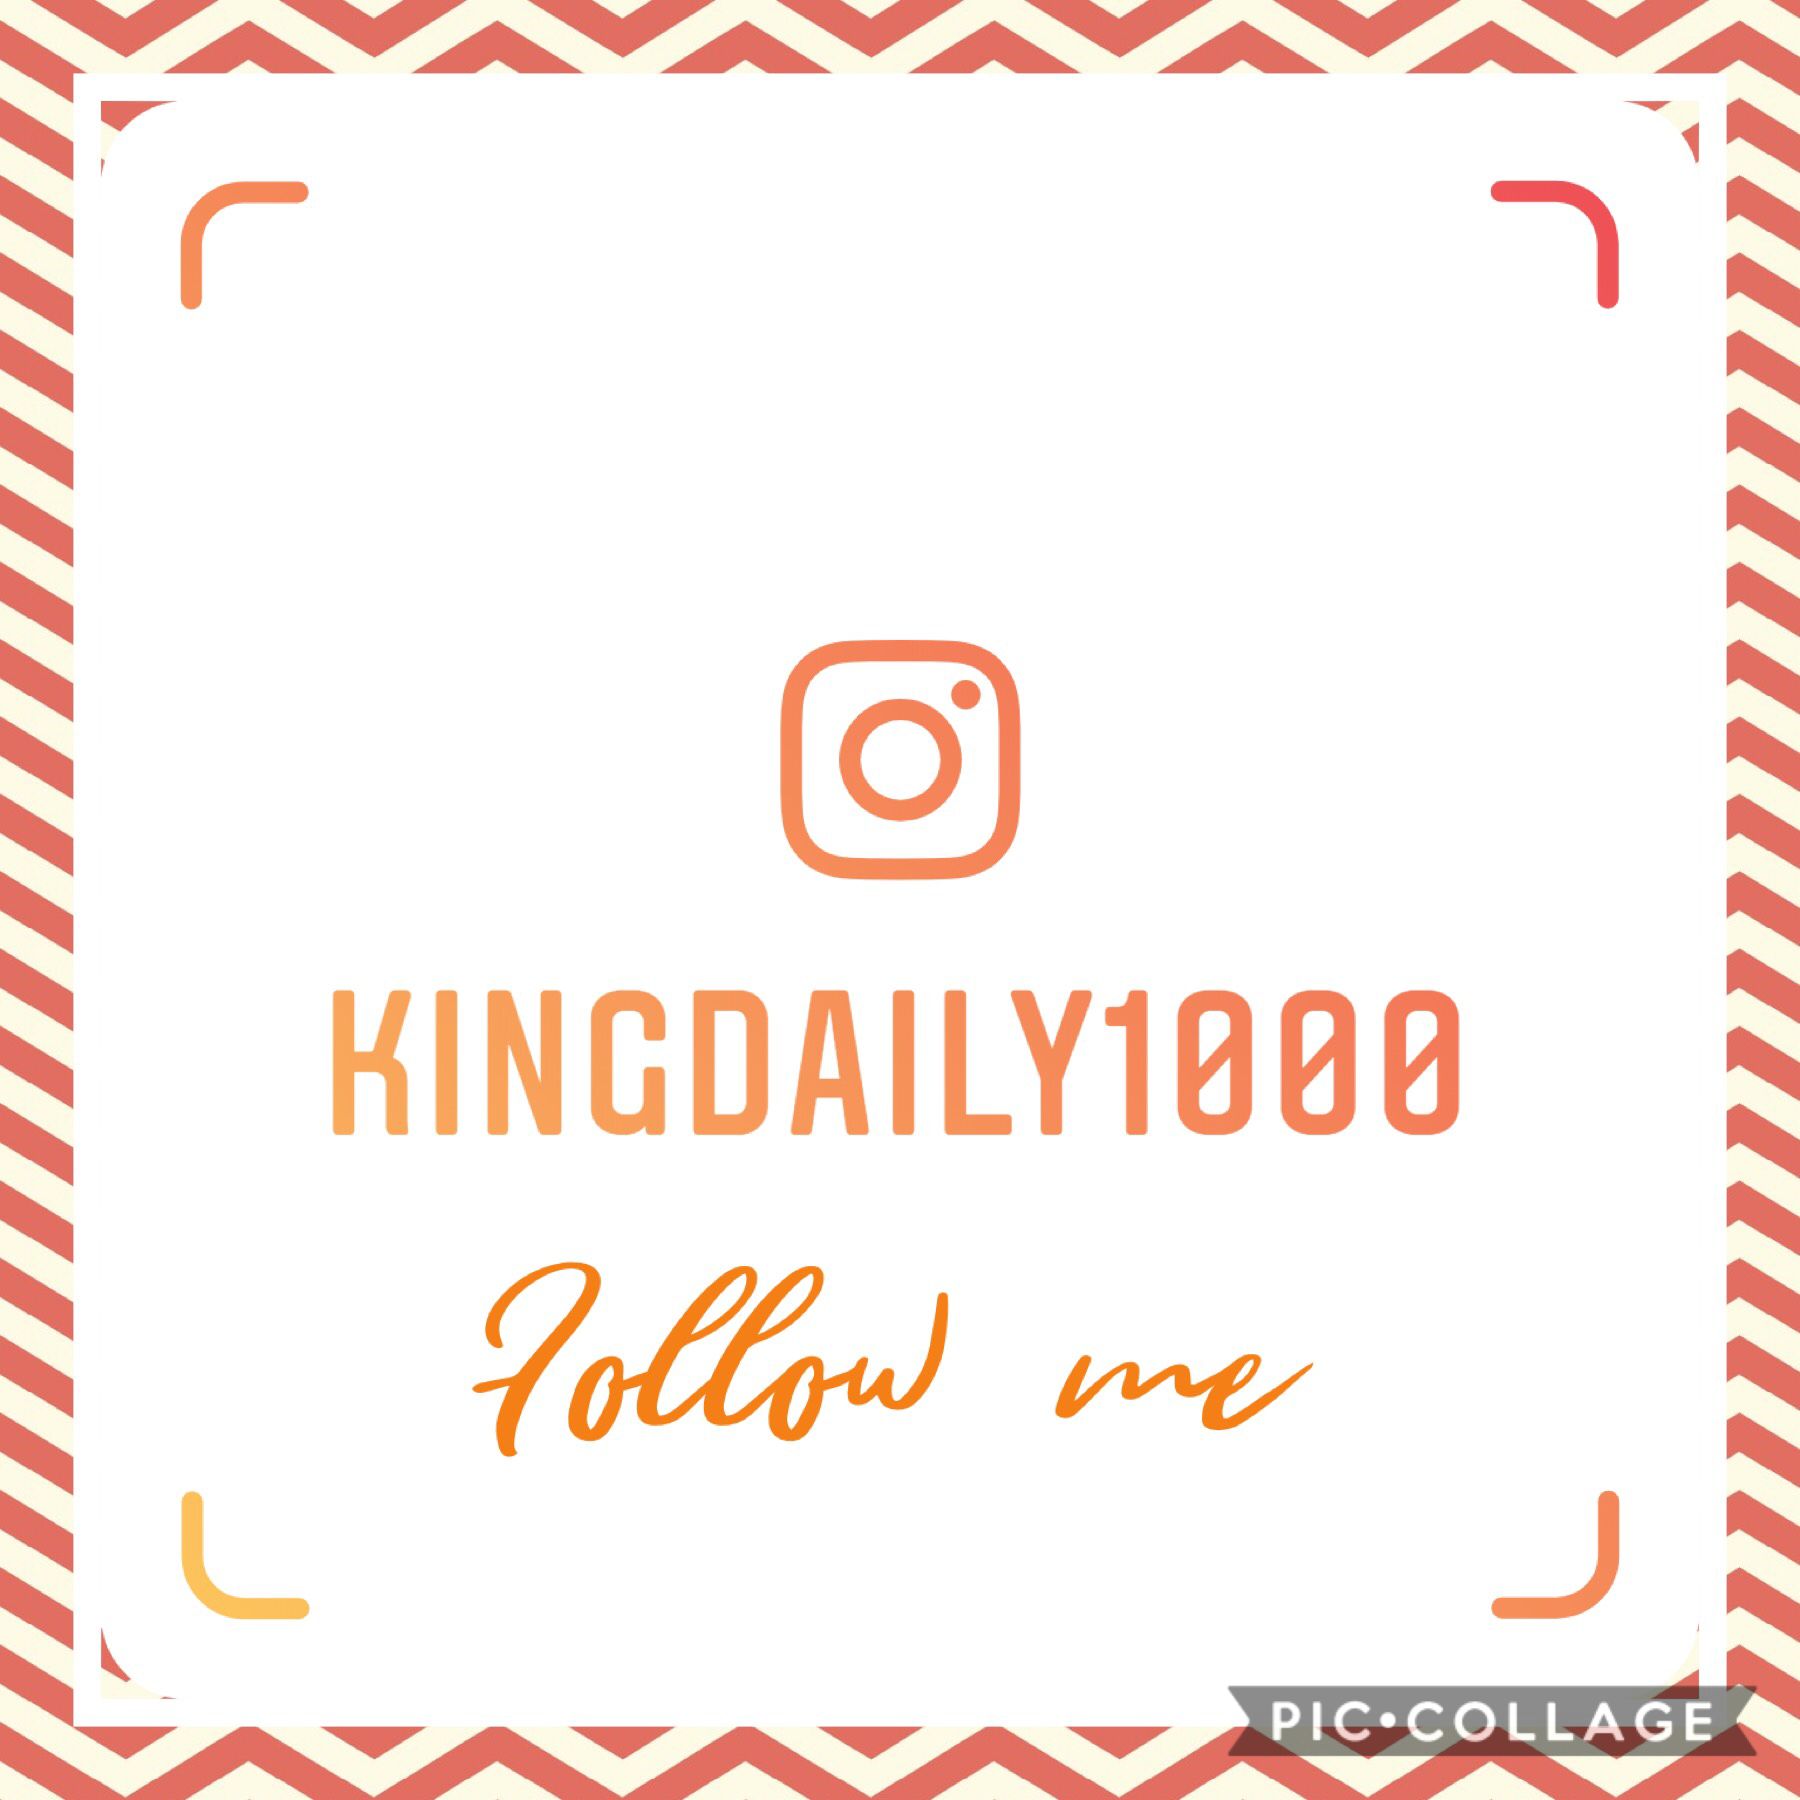 Follow me on the insta🧡